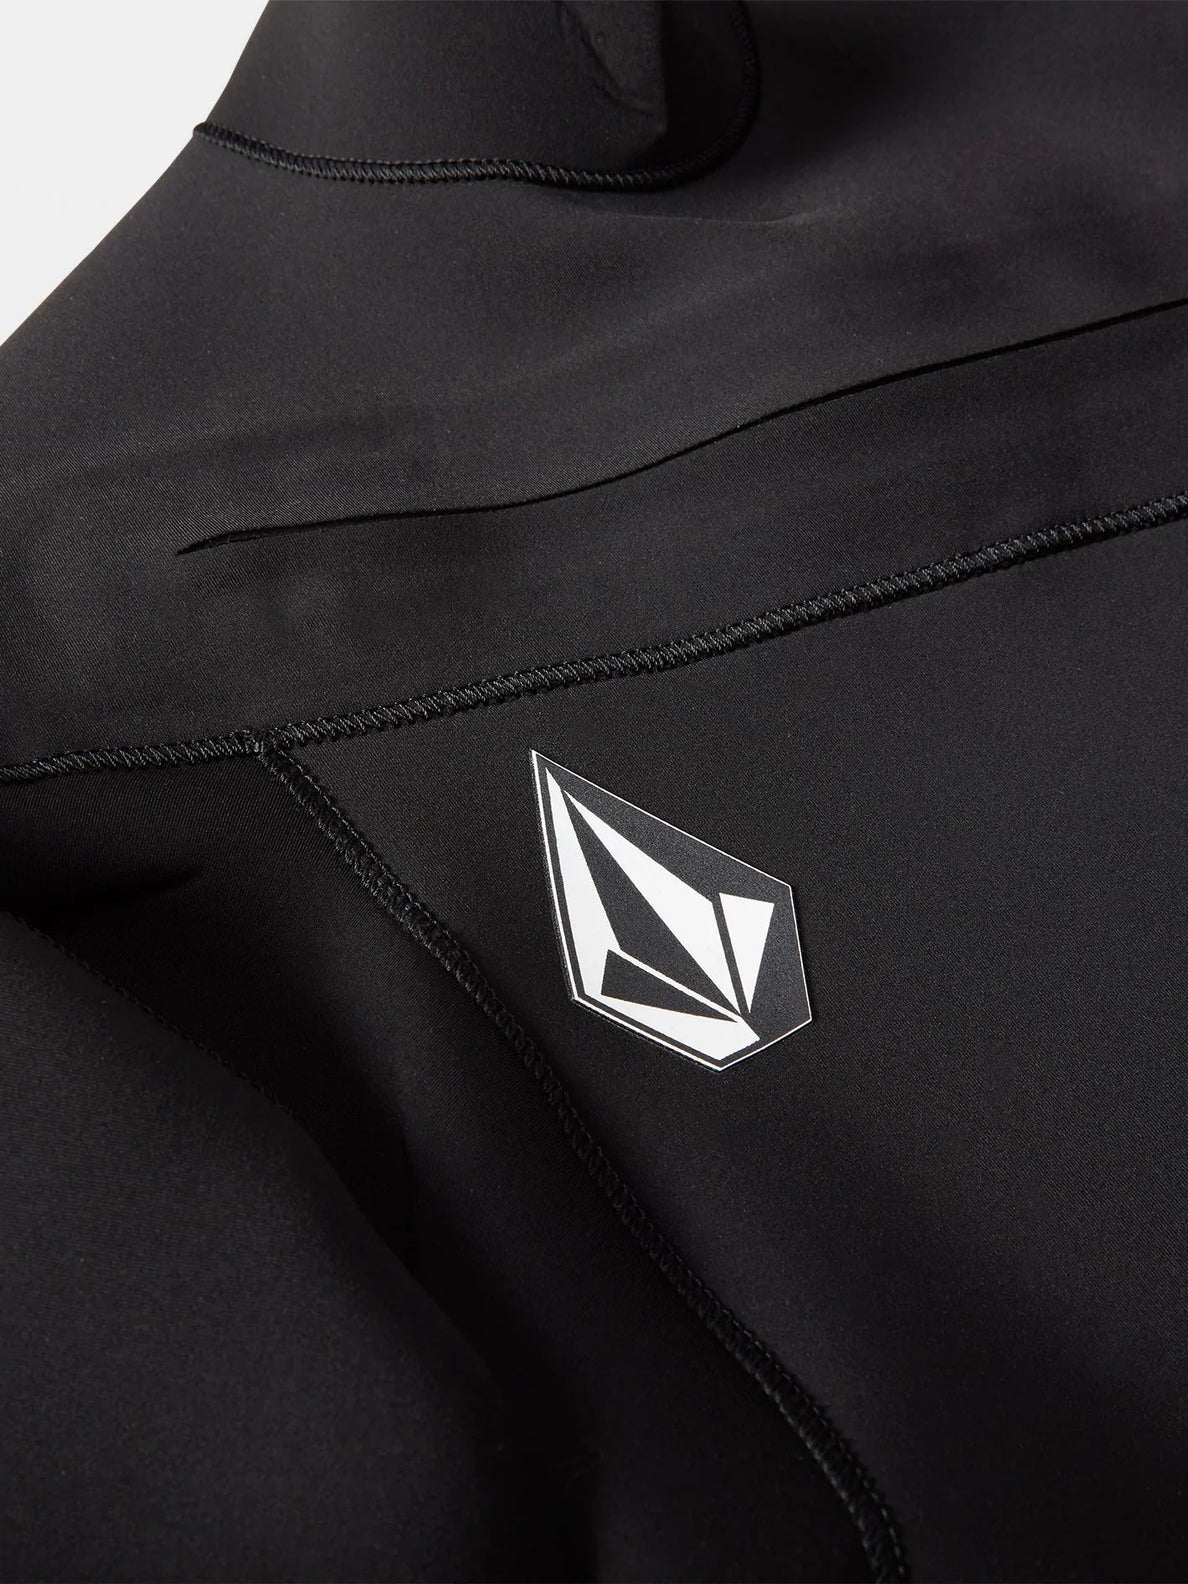 2/2Mm Long Sleeve Full Wetsuit - BLACK (A9532202_BLK) [13]